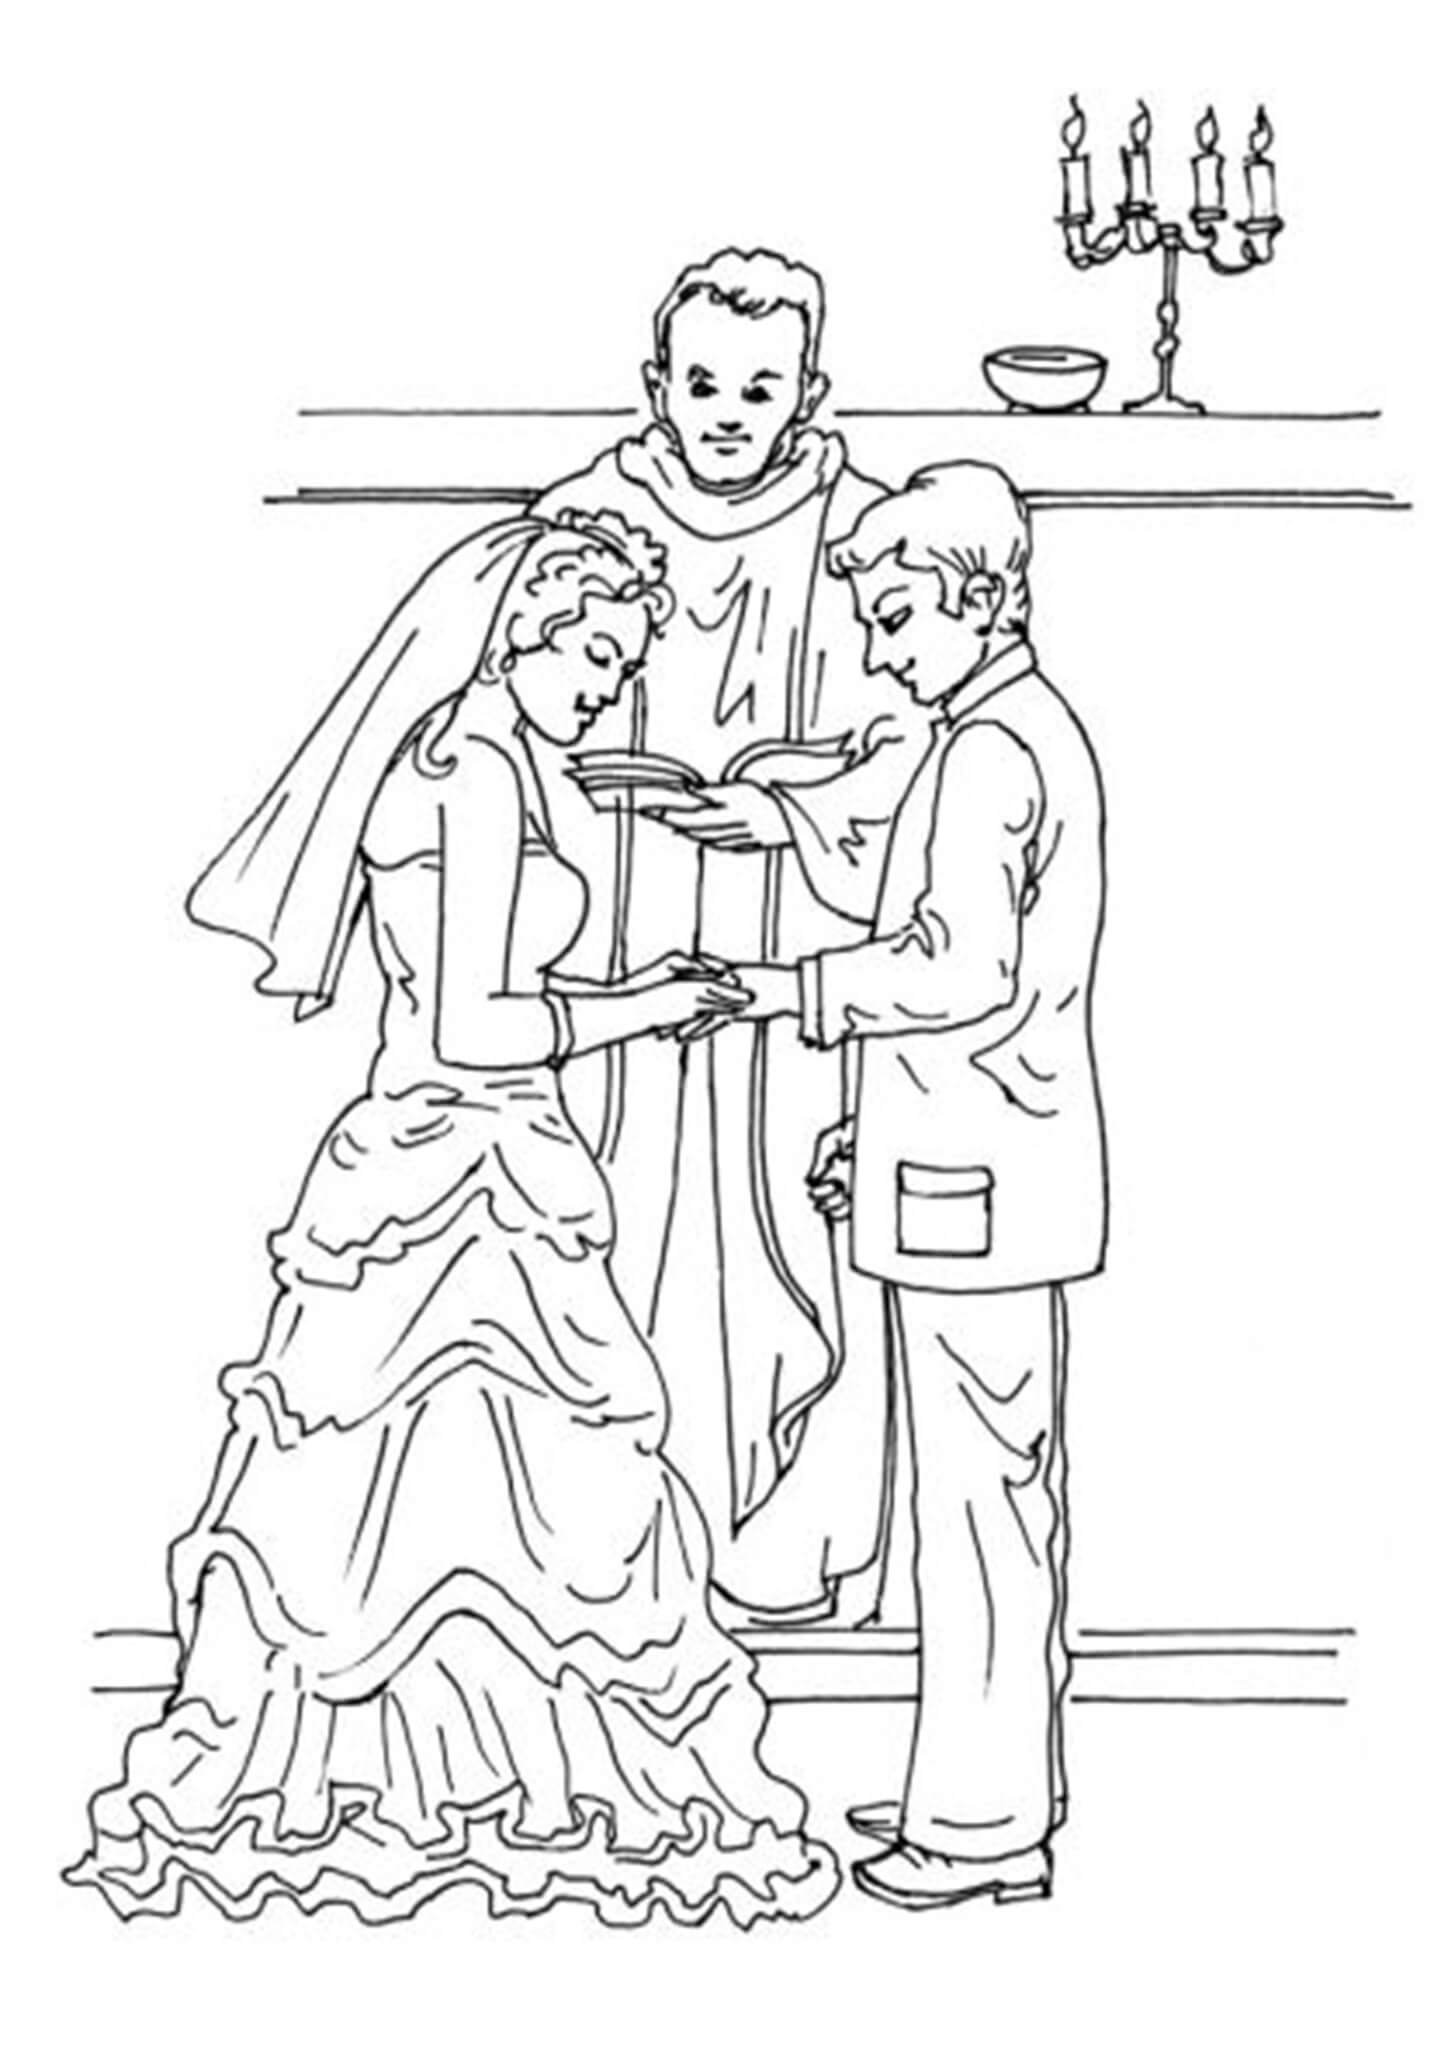 wedding-coloring-pages-to-printable-wedding-coloring-page-art-alley